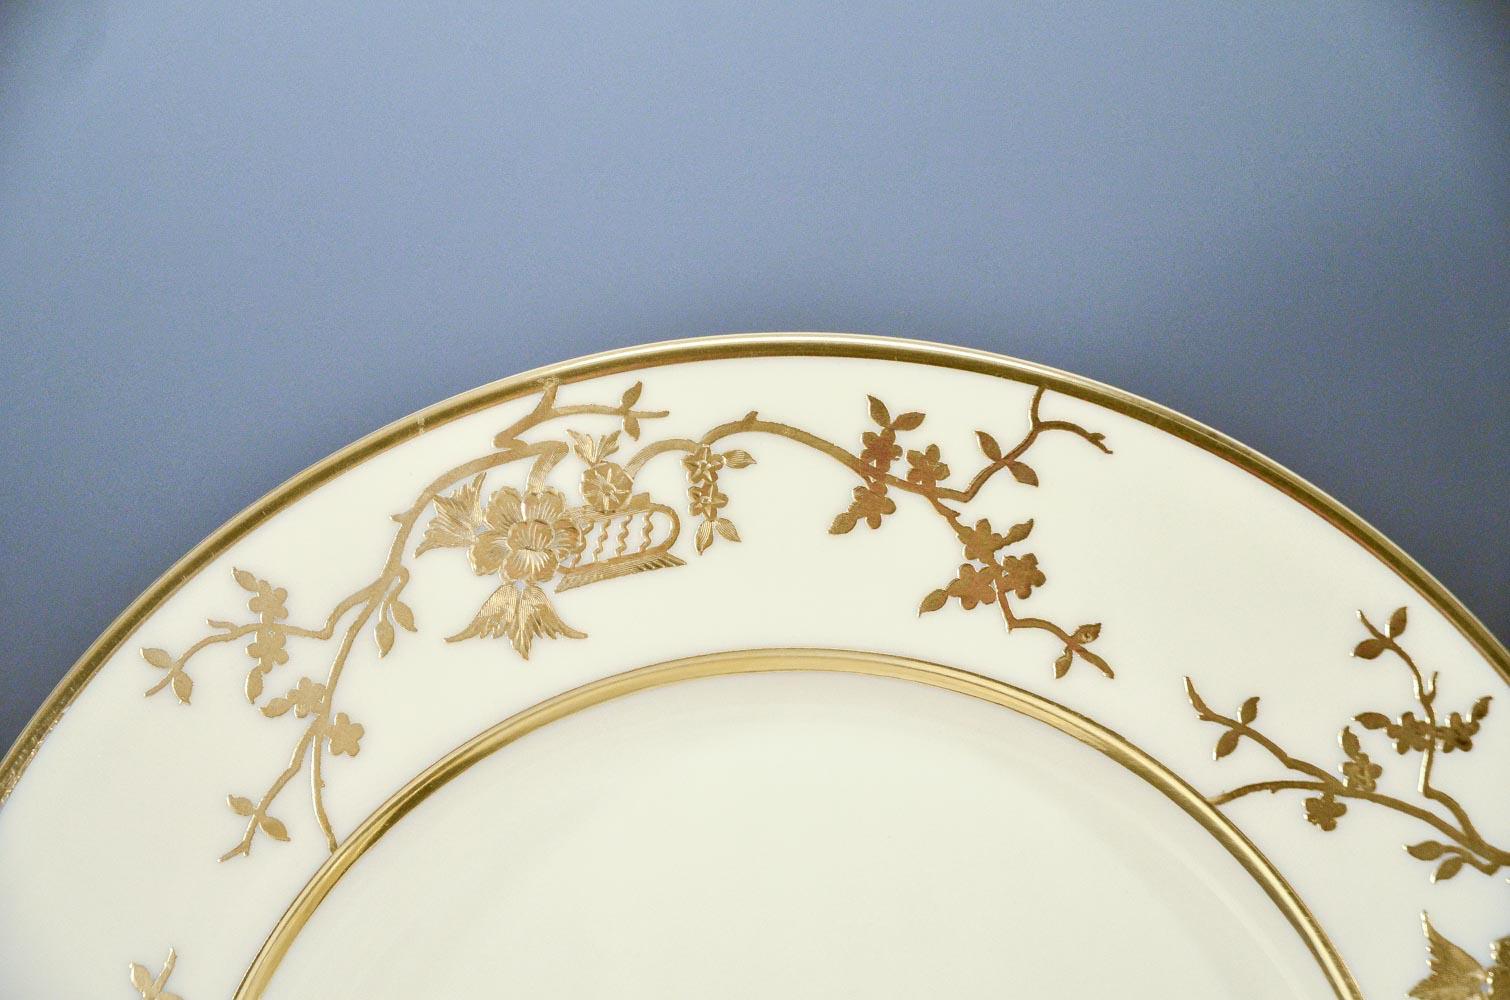 This amazing service for 12 was made by Ceramic Art Company/ Lenox ca. 1890 and features sterling silver with a gold wash overlay in an iconic 